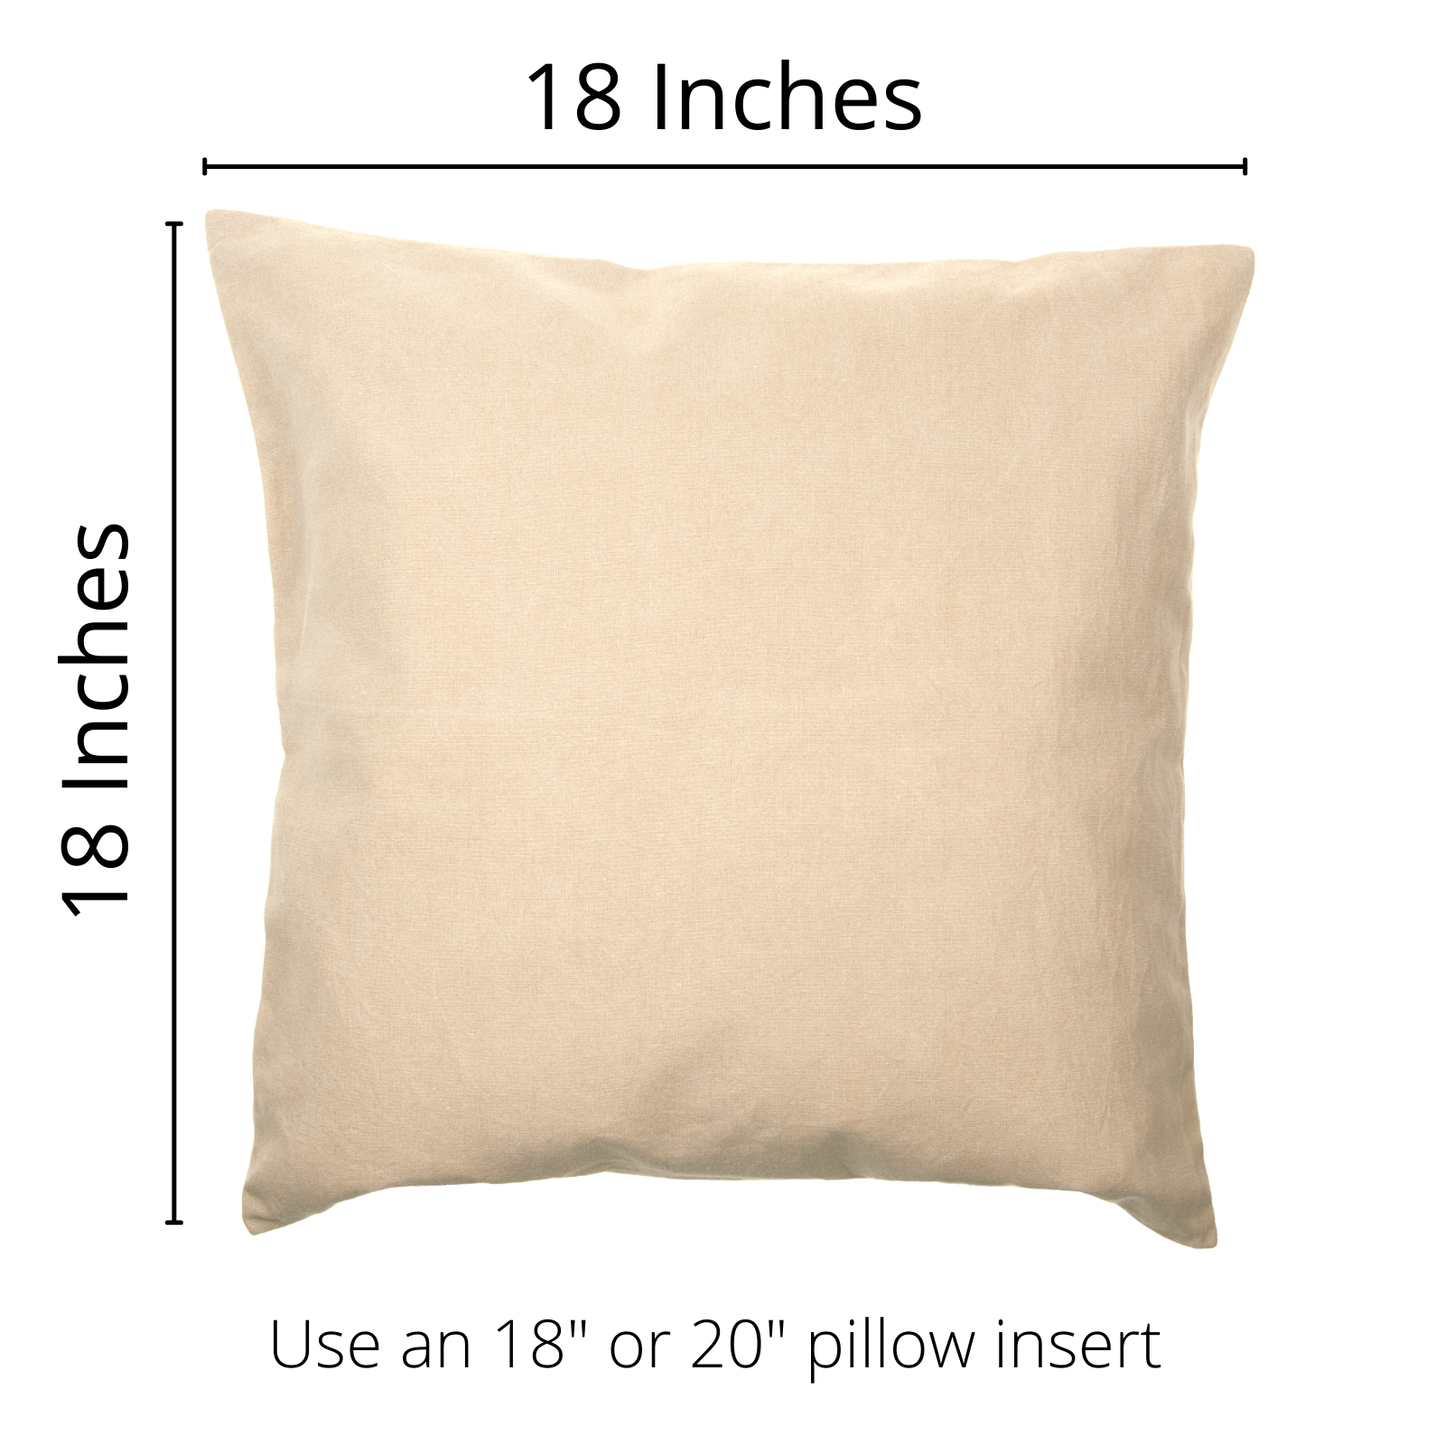 New Mexico Pillow Cover